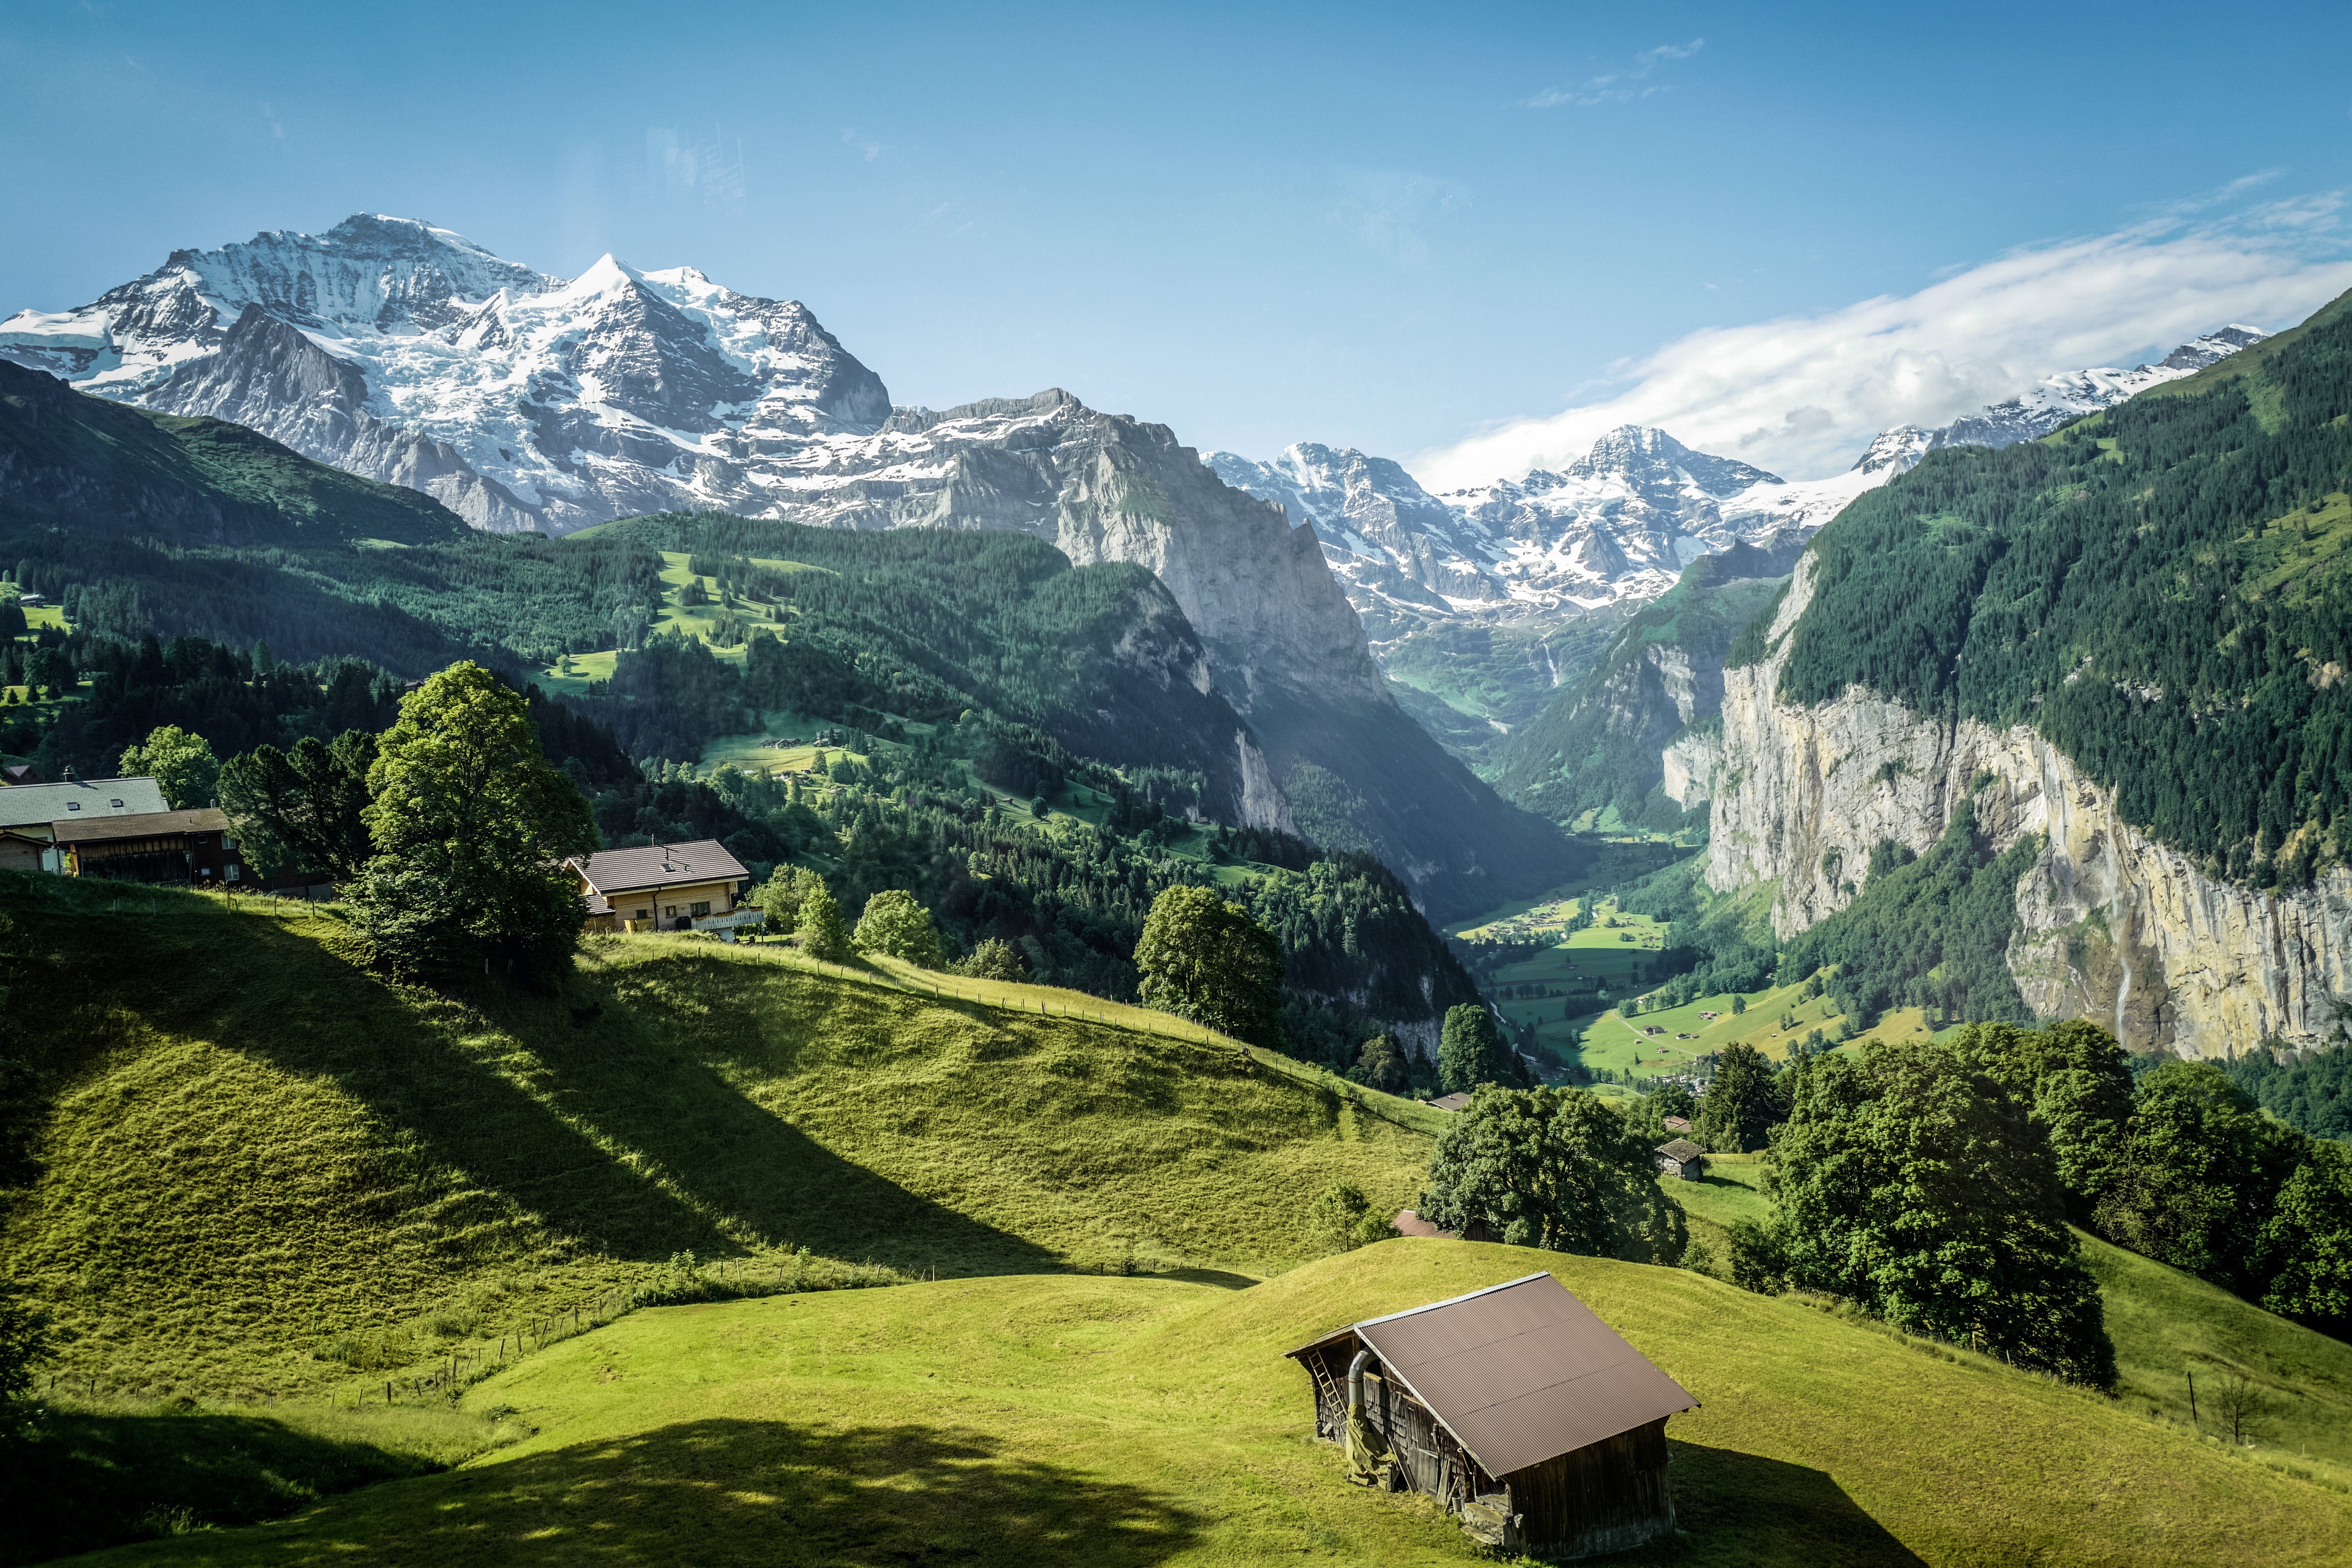 Famous Jungfrau mountain with forest and valley, Swiss Bernese Alps, Switzerland